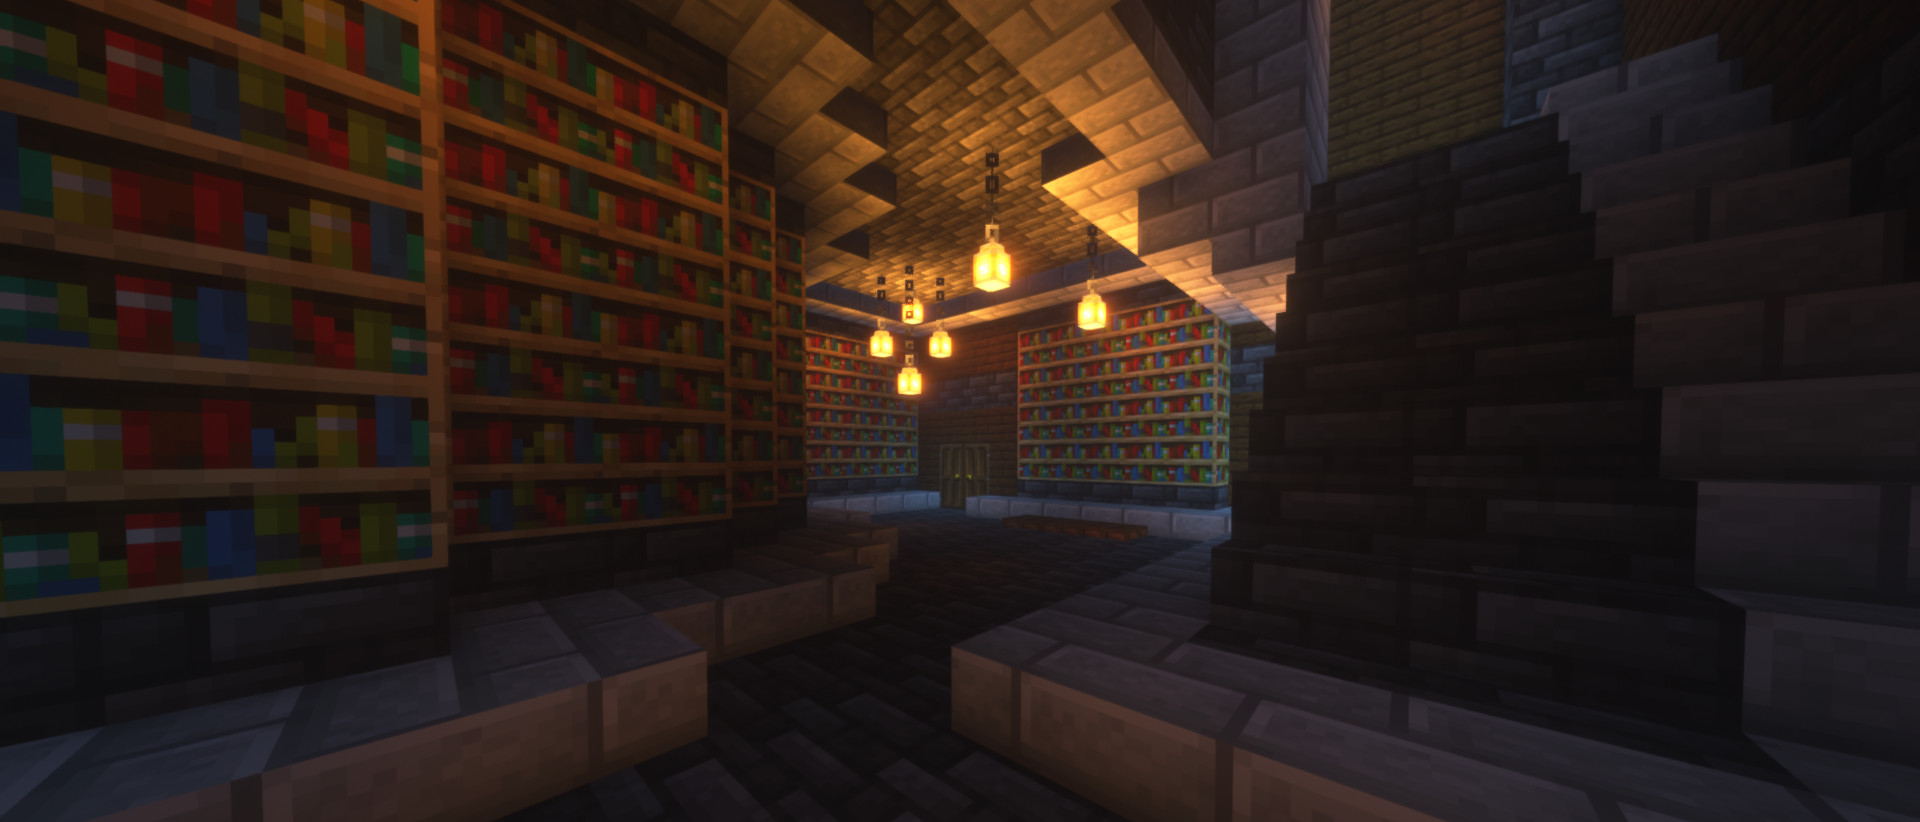 The Minecraft Library of Babel: A working version of the Library of Babel created in Minecraft. Minecraft Server